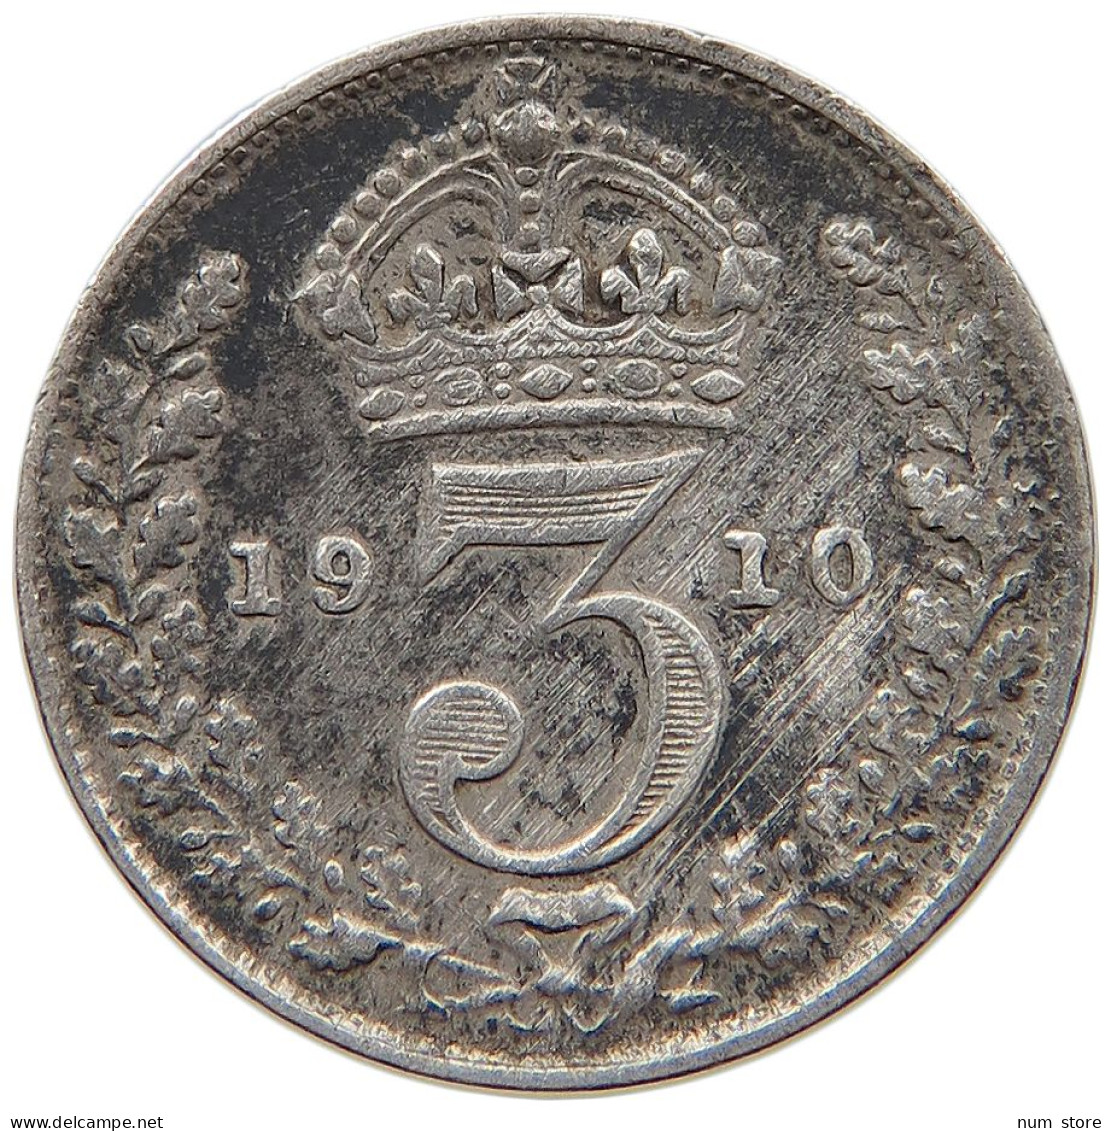 GREAT BRITAIN THREEPENCE 1910 #s013 0229 - F. 3 Pence